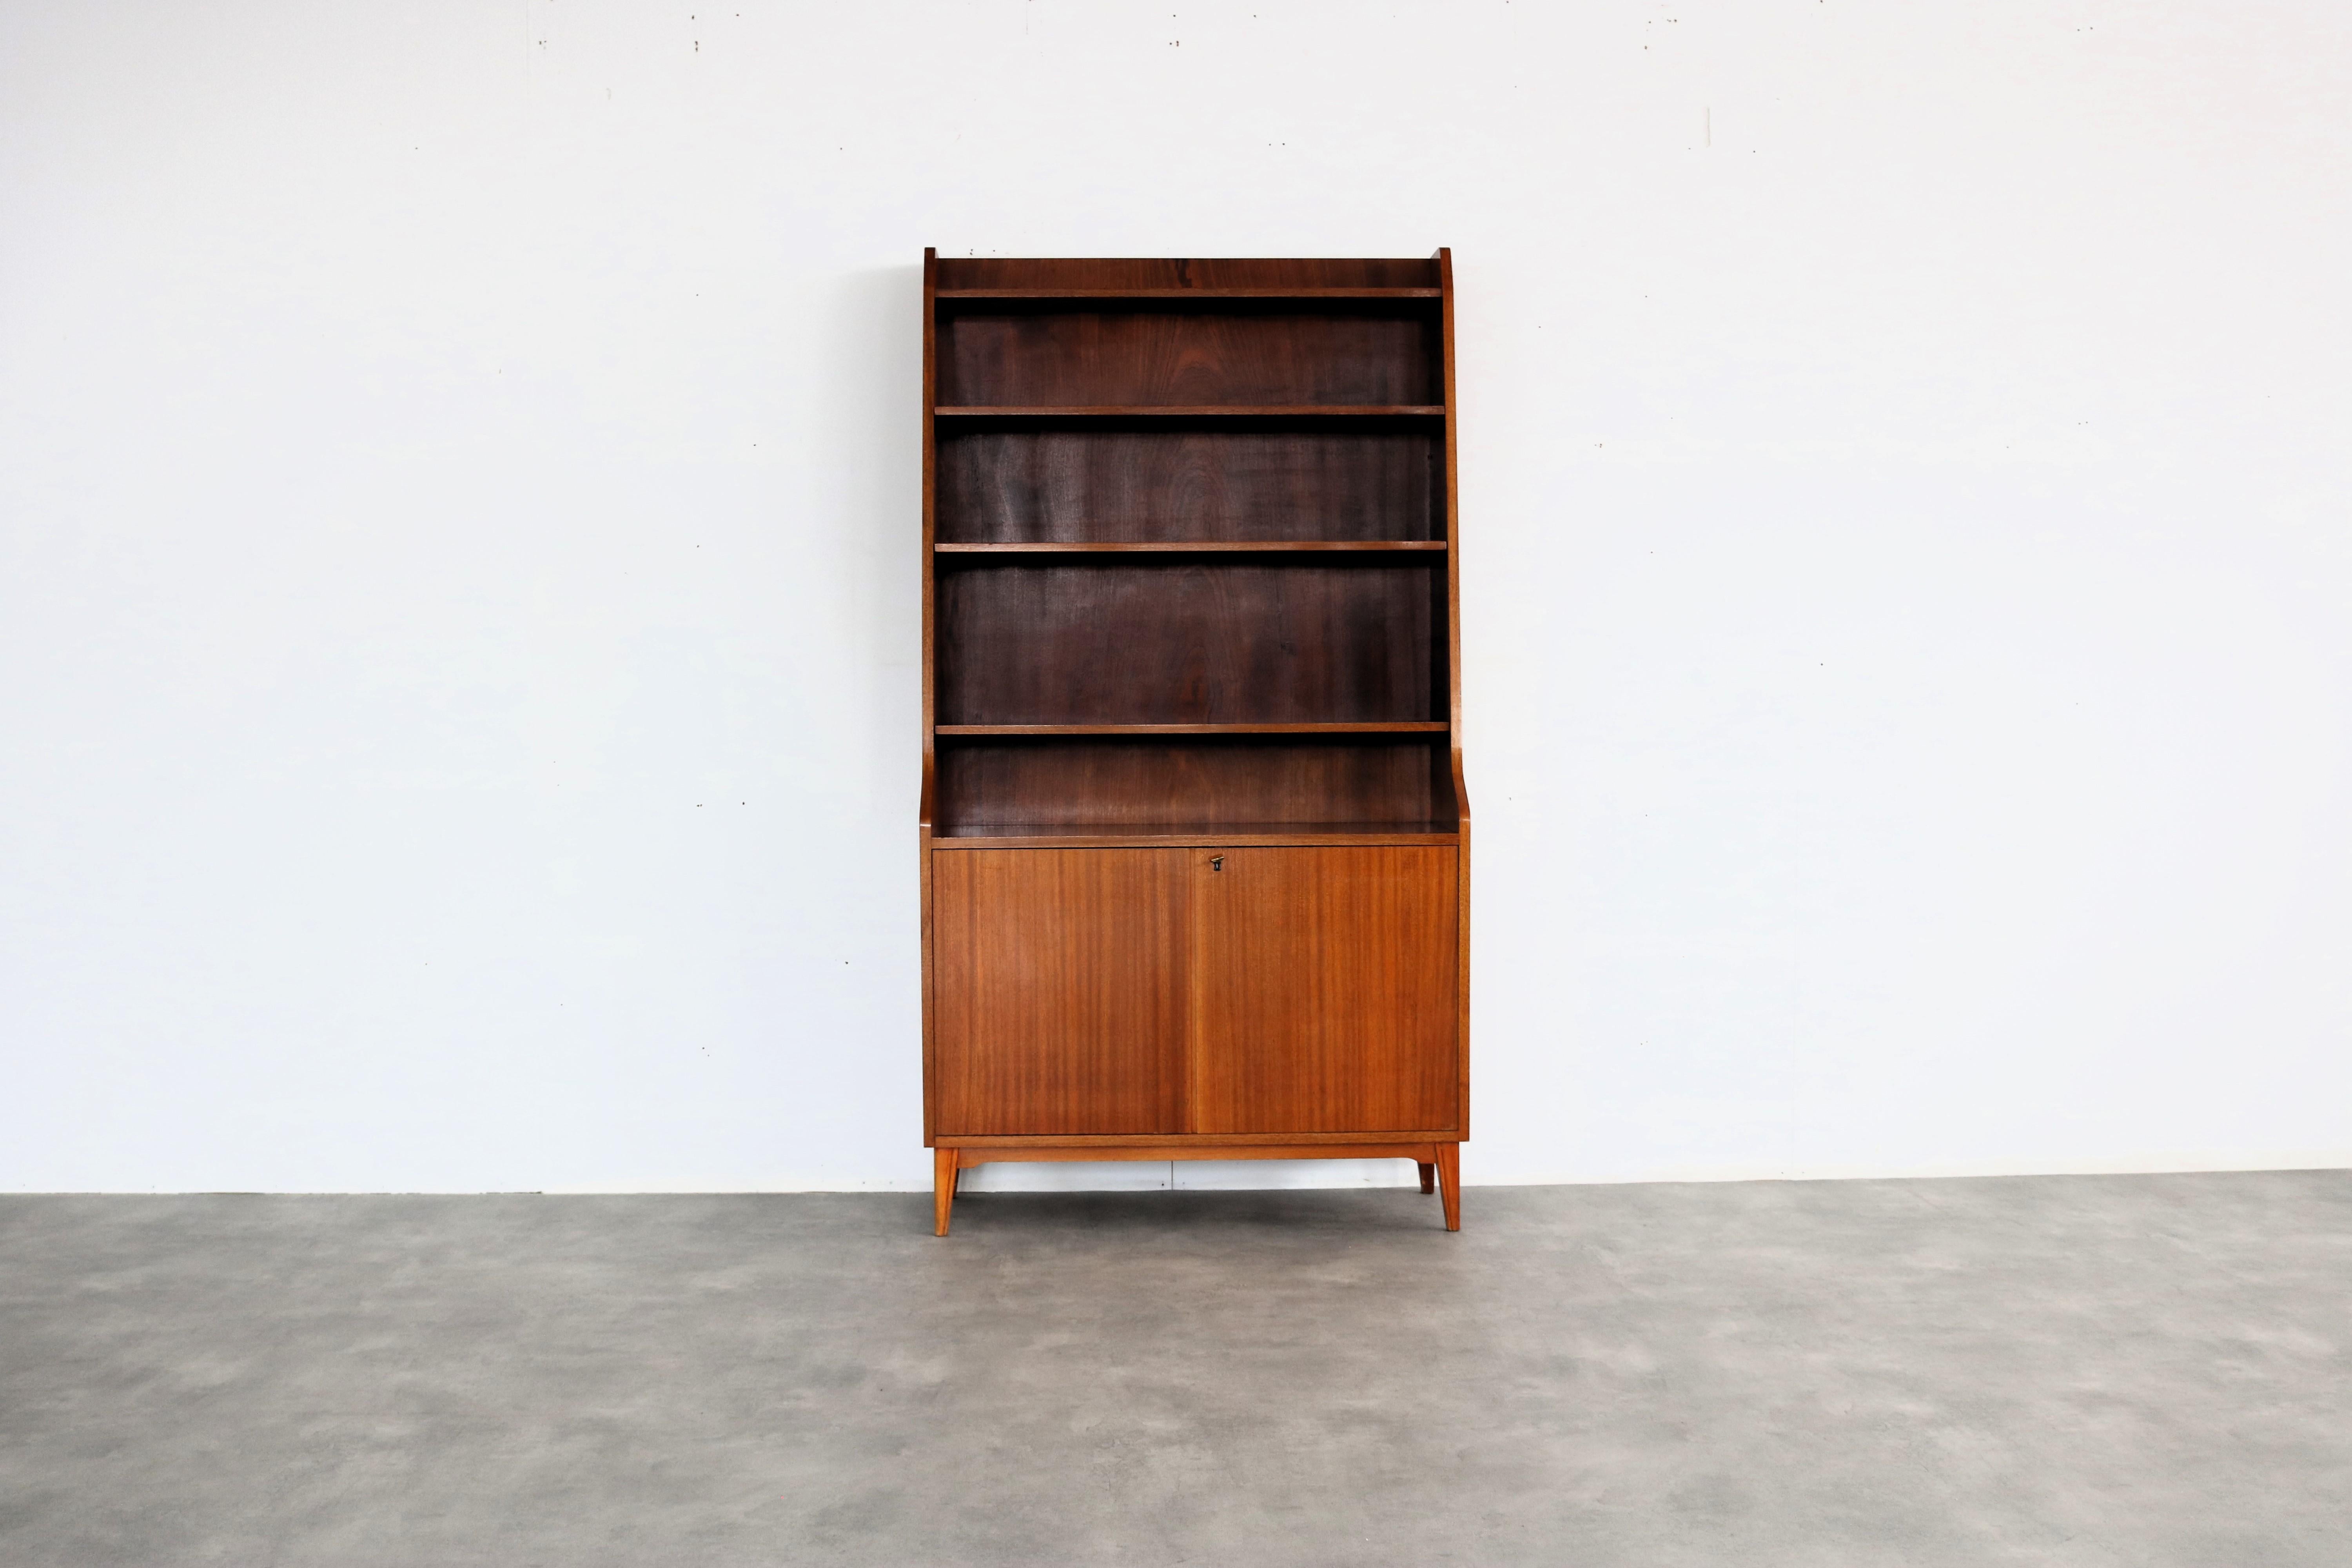 vintage bookcase | cupboard | 60s | Sweden

period | 60's
design | unknown | Sweden
condition | good | slight signs of use/colour difference
size | 175 x 95 x 37 (hxwxd)

details | teak;

article number | 2239